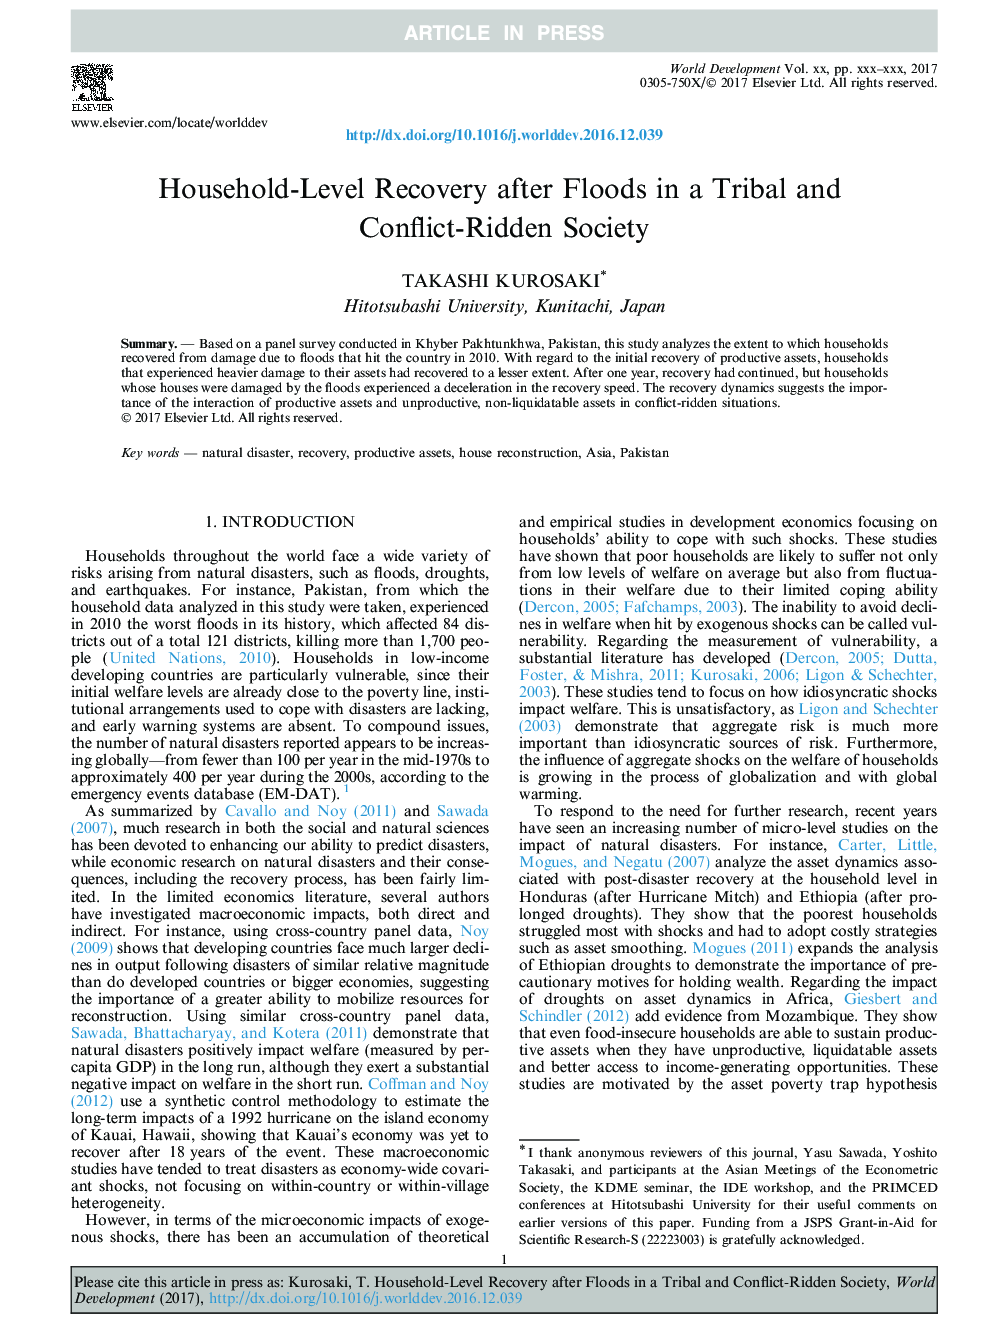 Household-Level Recovery after Floods in a Tribal and Conflict-Ridden Society